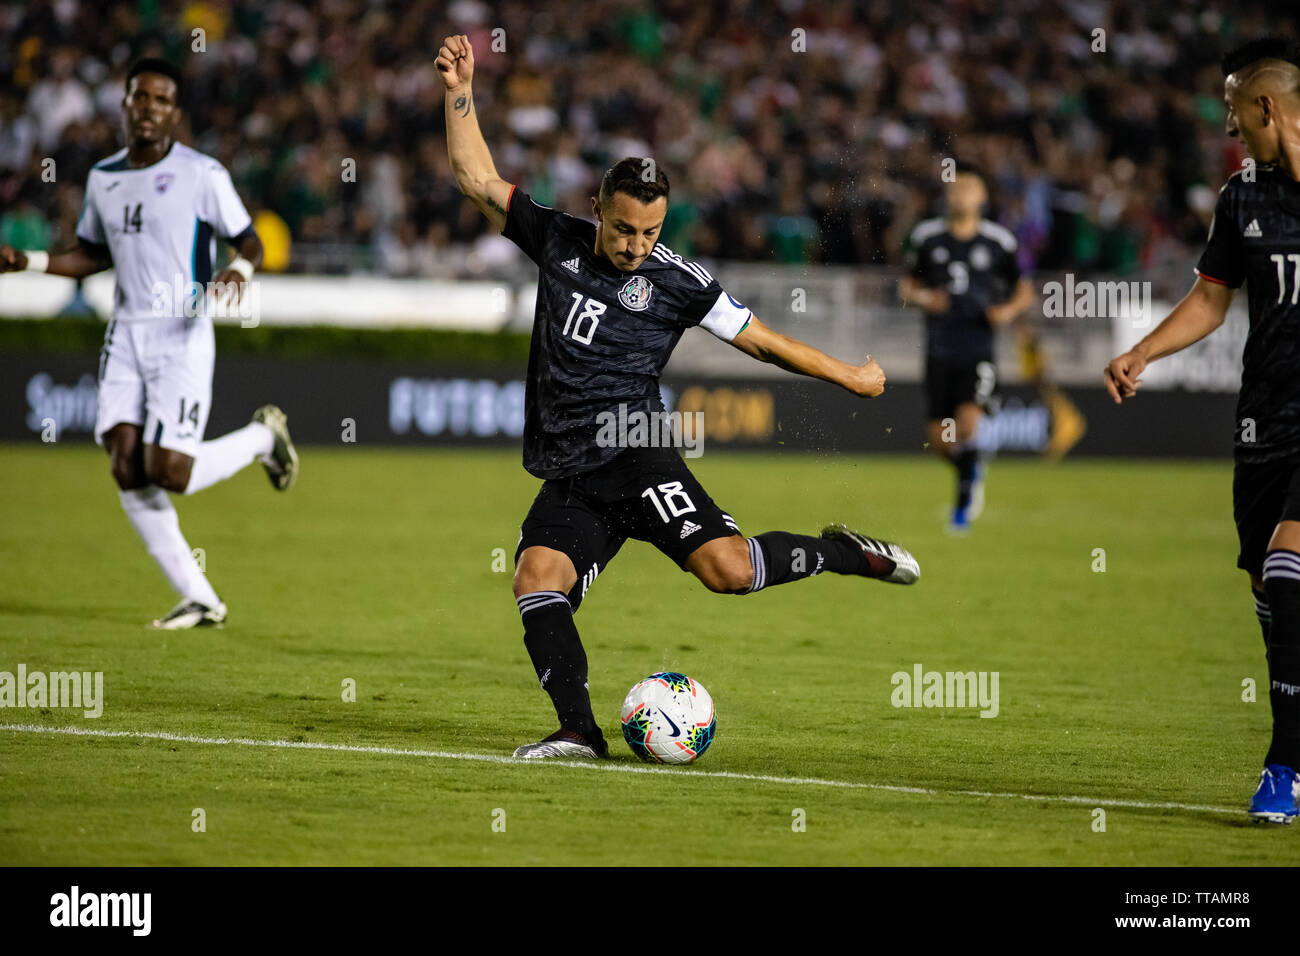 Pasadena, USA. 15th June, 2019. Andres Guardado (18) rips a shot from the 18 yard line in the second half of Mexico's Gold Cup opener against Cuba. Credit: Ben Nichols/Alamy Live News Stock Photo